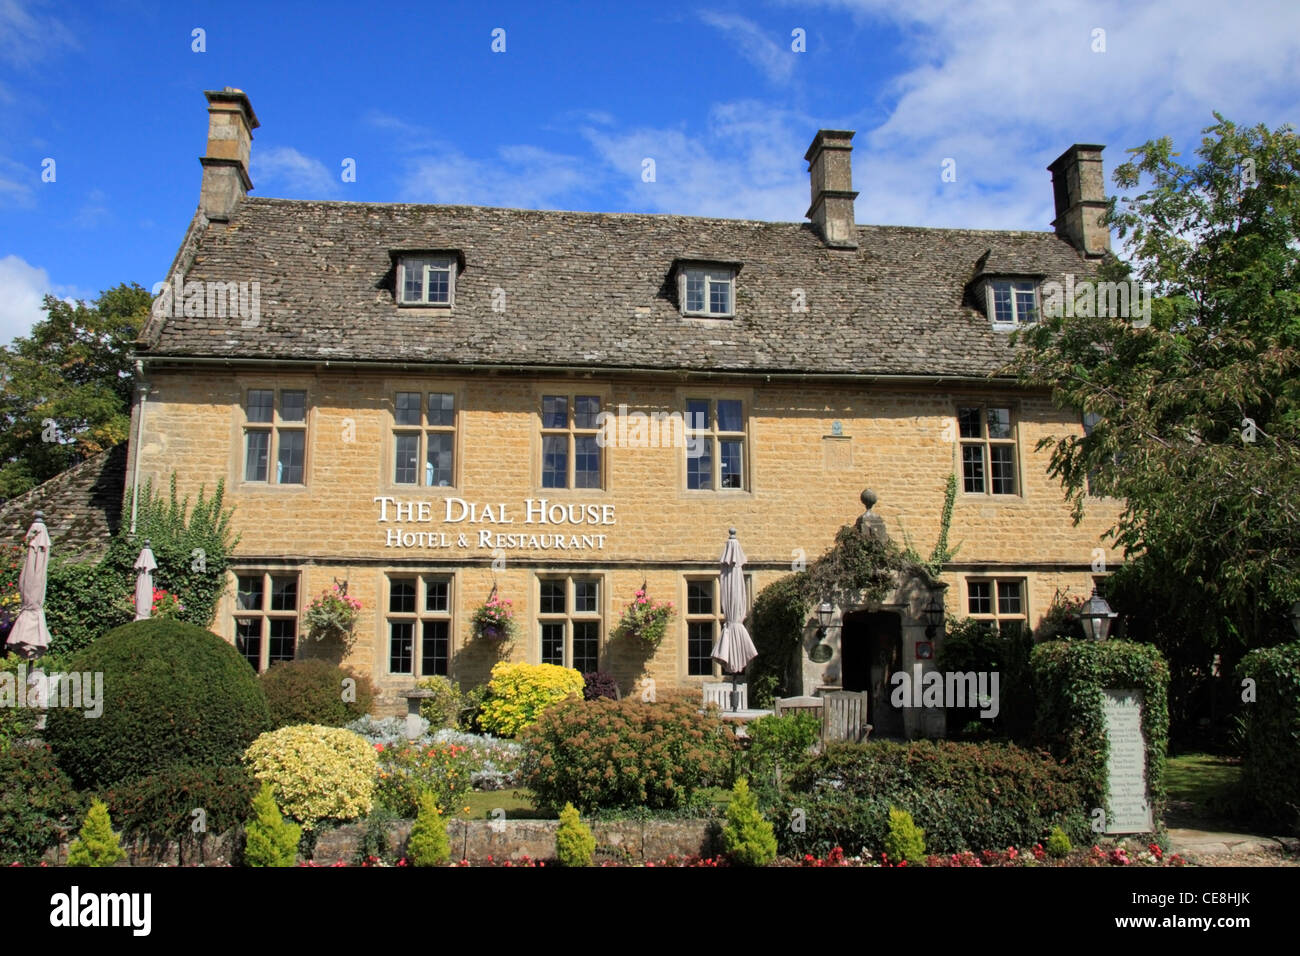 The Dial House Hotel and Restaurant in Bourton on the Water in the Cotswolds, England. Stock Photo